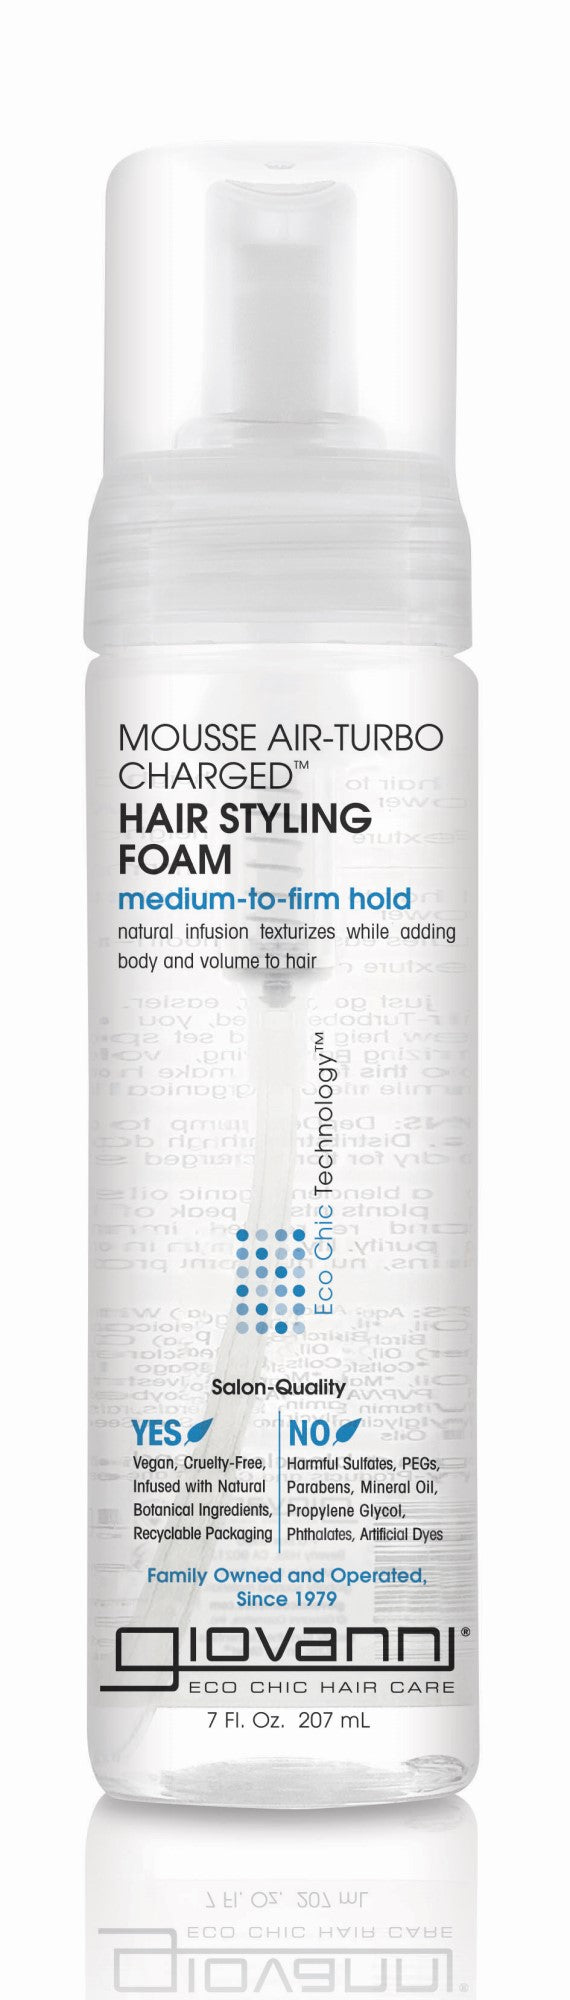 Giovanni Natural Mousse Air-turbo Charged Hair Styling Foam 207ml